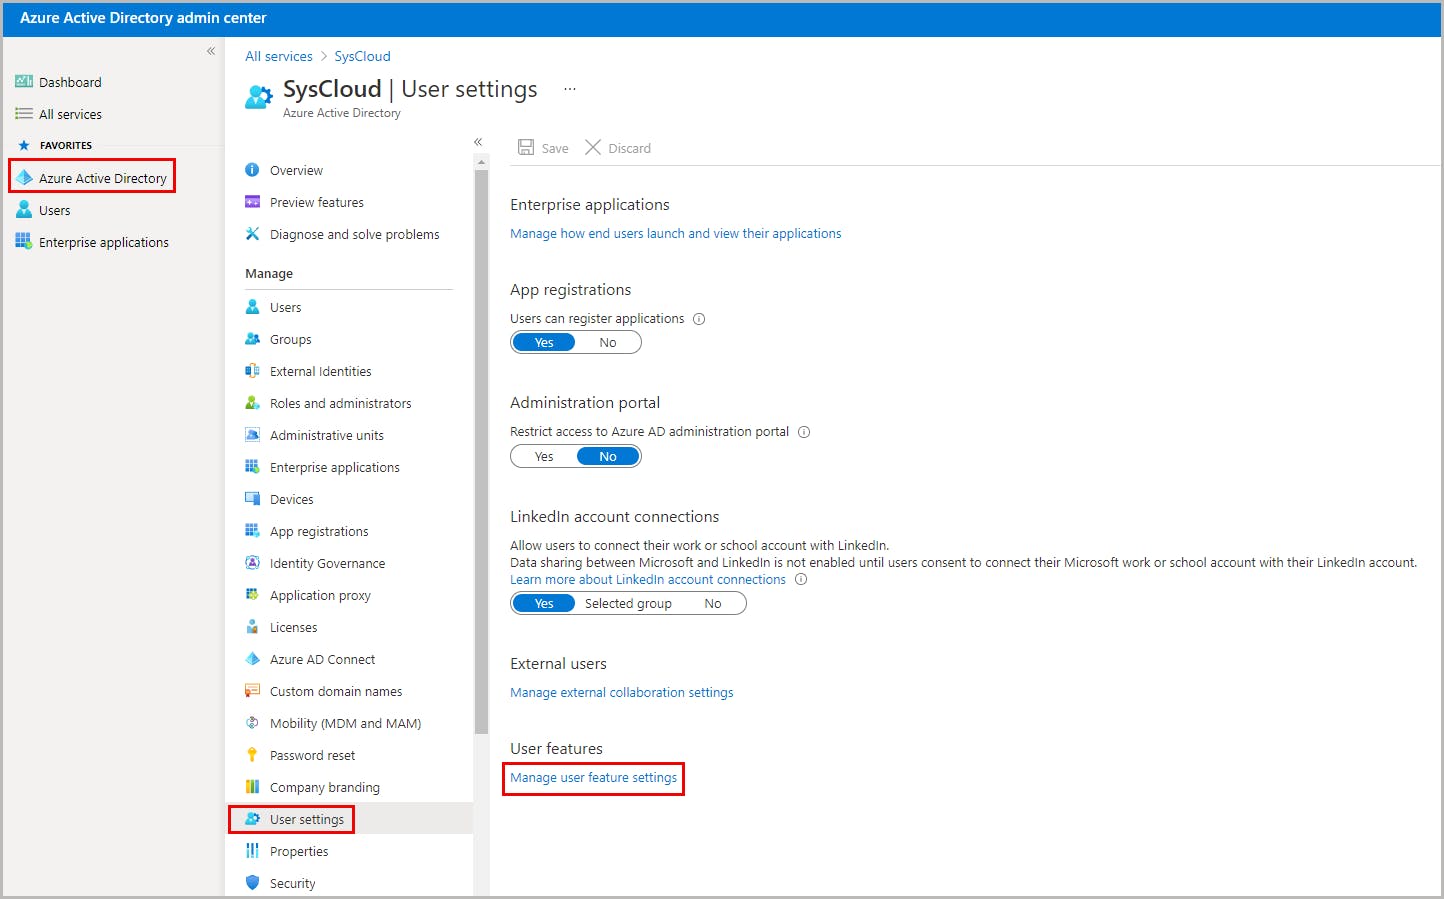 manage user feature settings in azure active directory